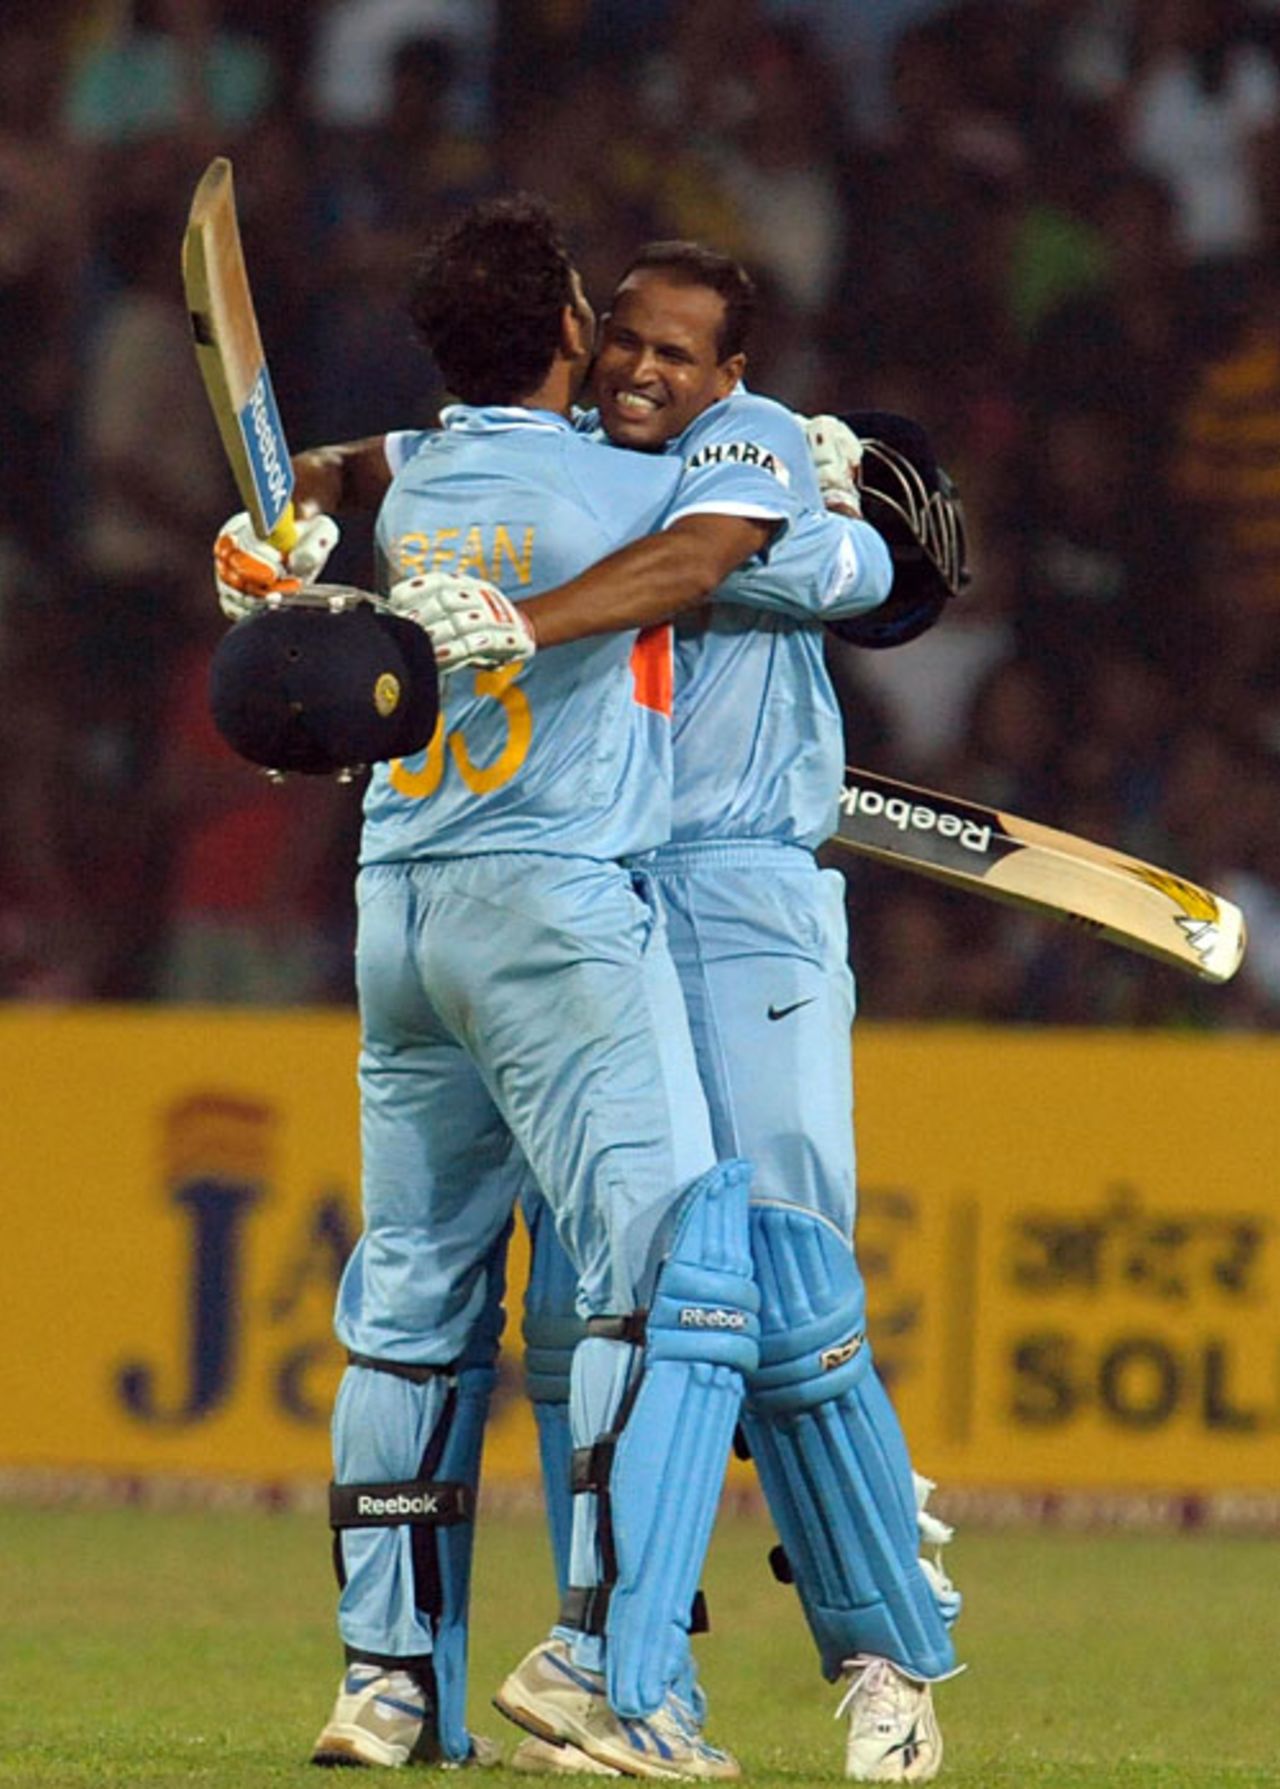 Yusuf and Irfan Pathan embrace after taking India to victory, Sri Lanka v India, Only T20 International, Colombo, February 10, 2009